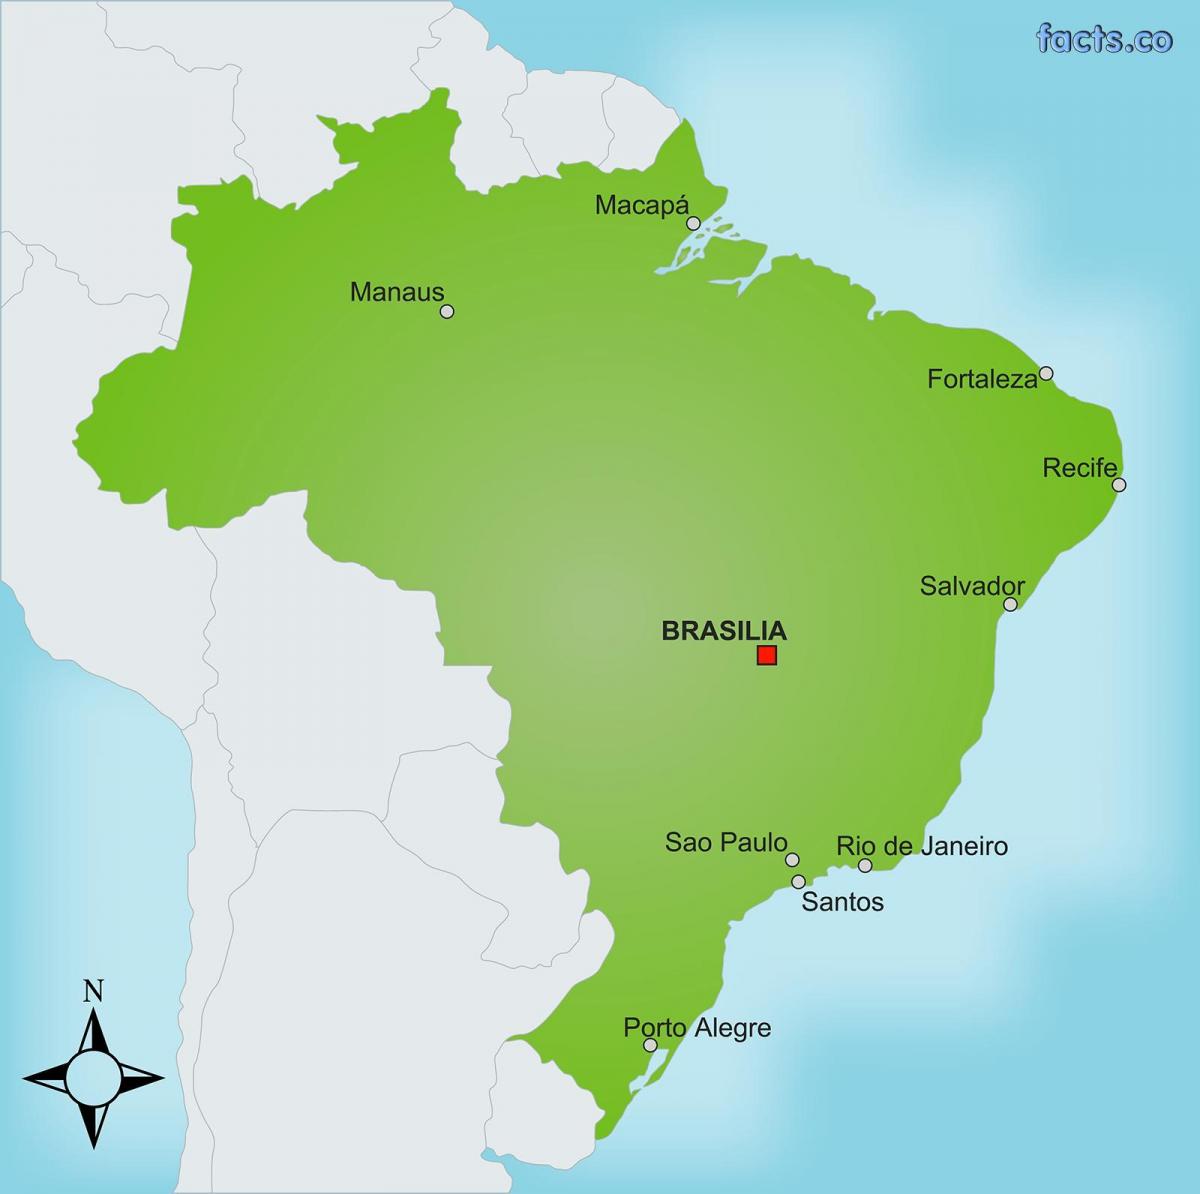 capital of Brazil on map